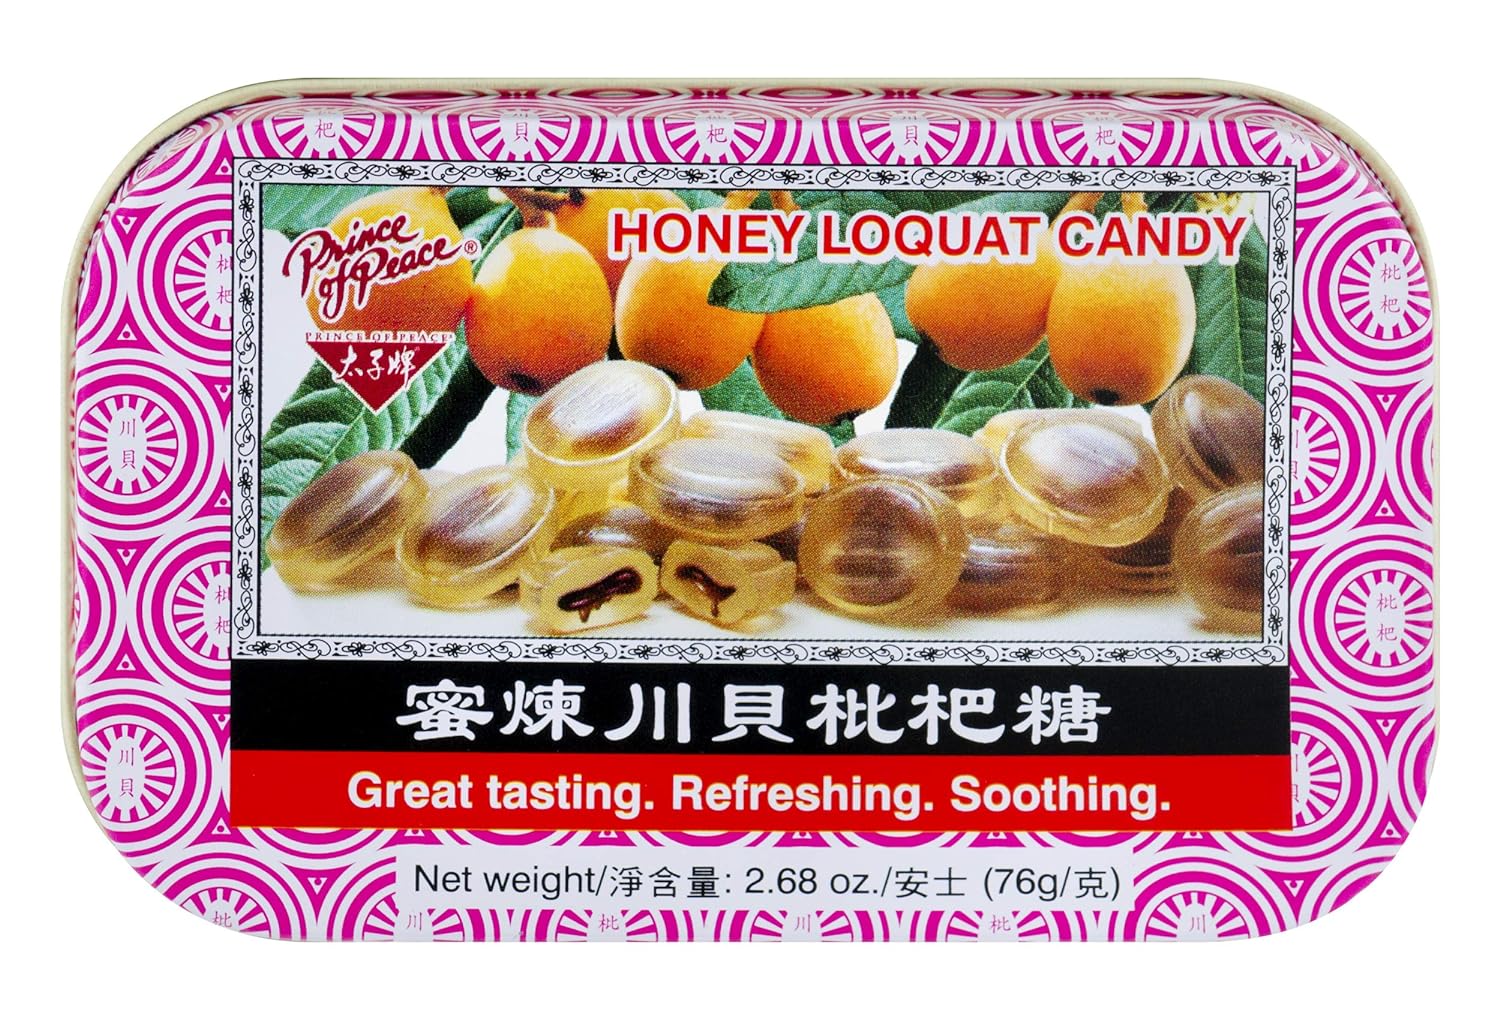 Prince of Peace Honey Loquat Candy, 8 Pack